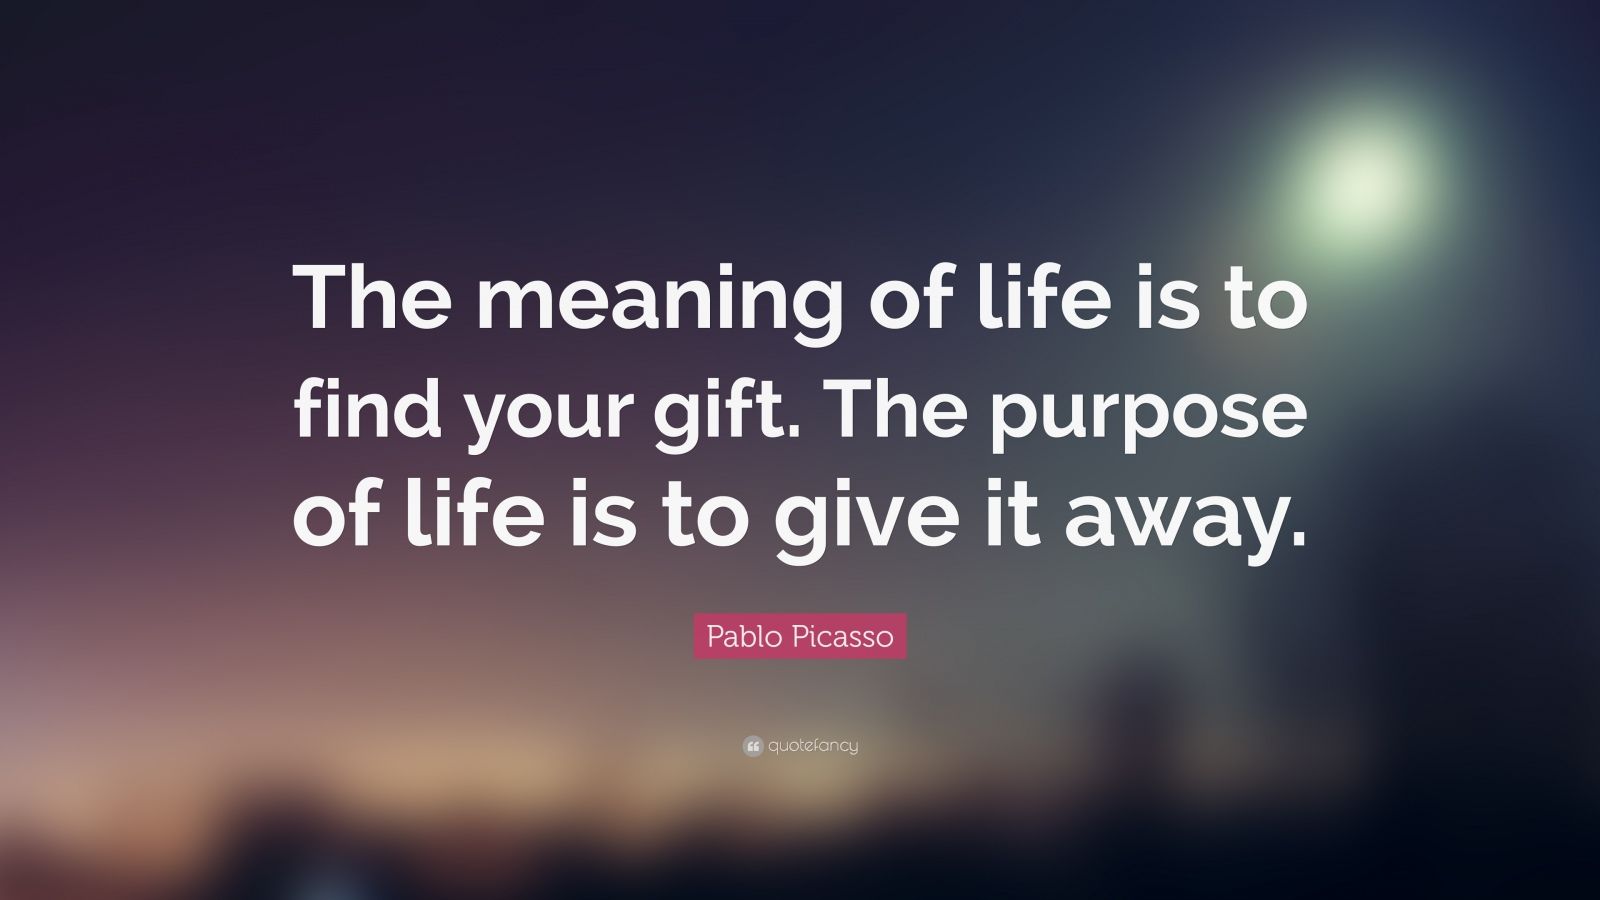 Pablo Picasso Quote: “The meaning of life is to find your gift. The